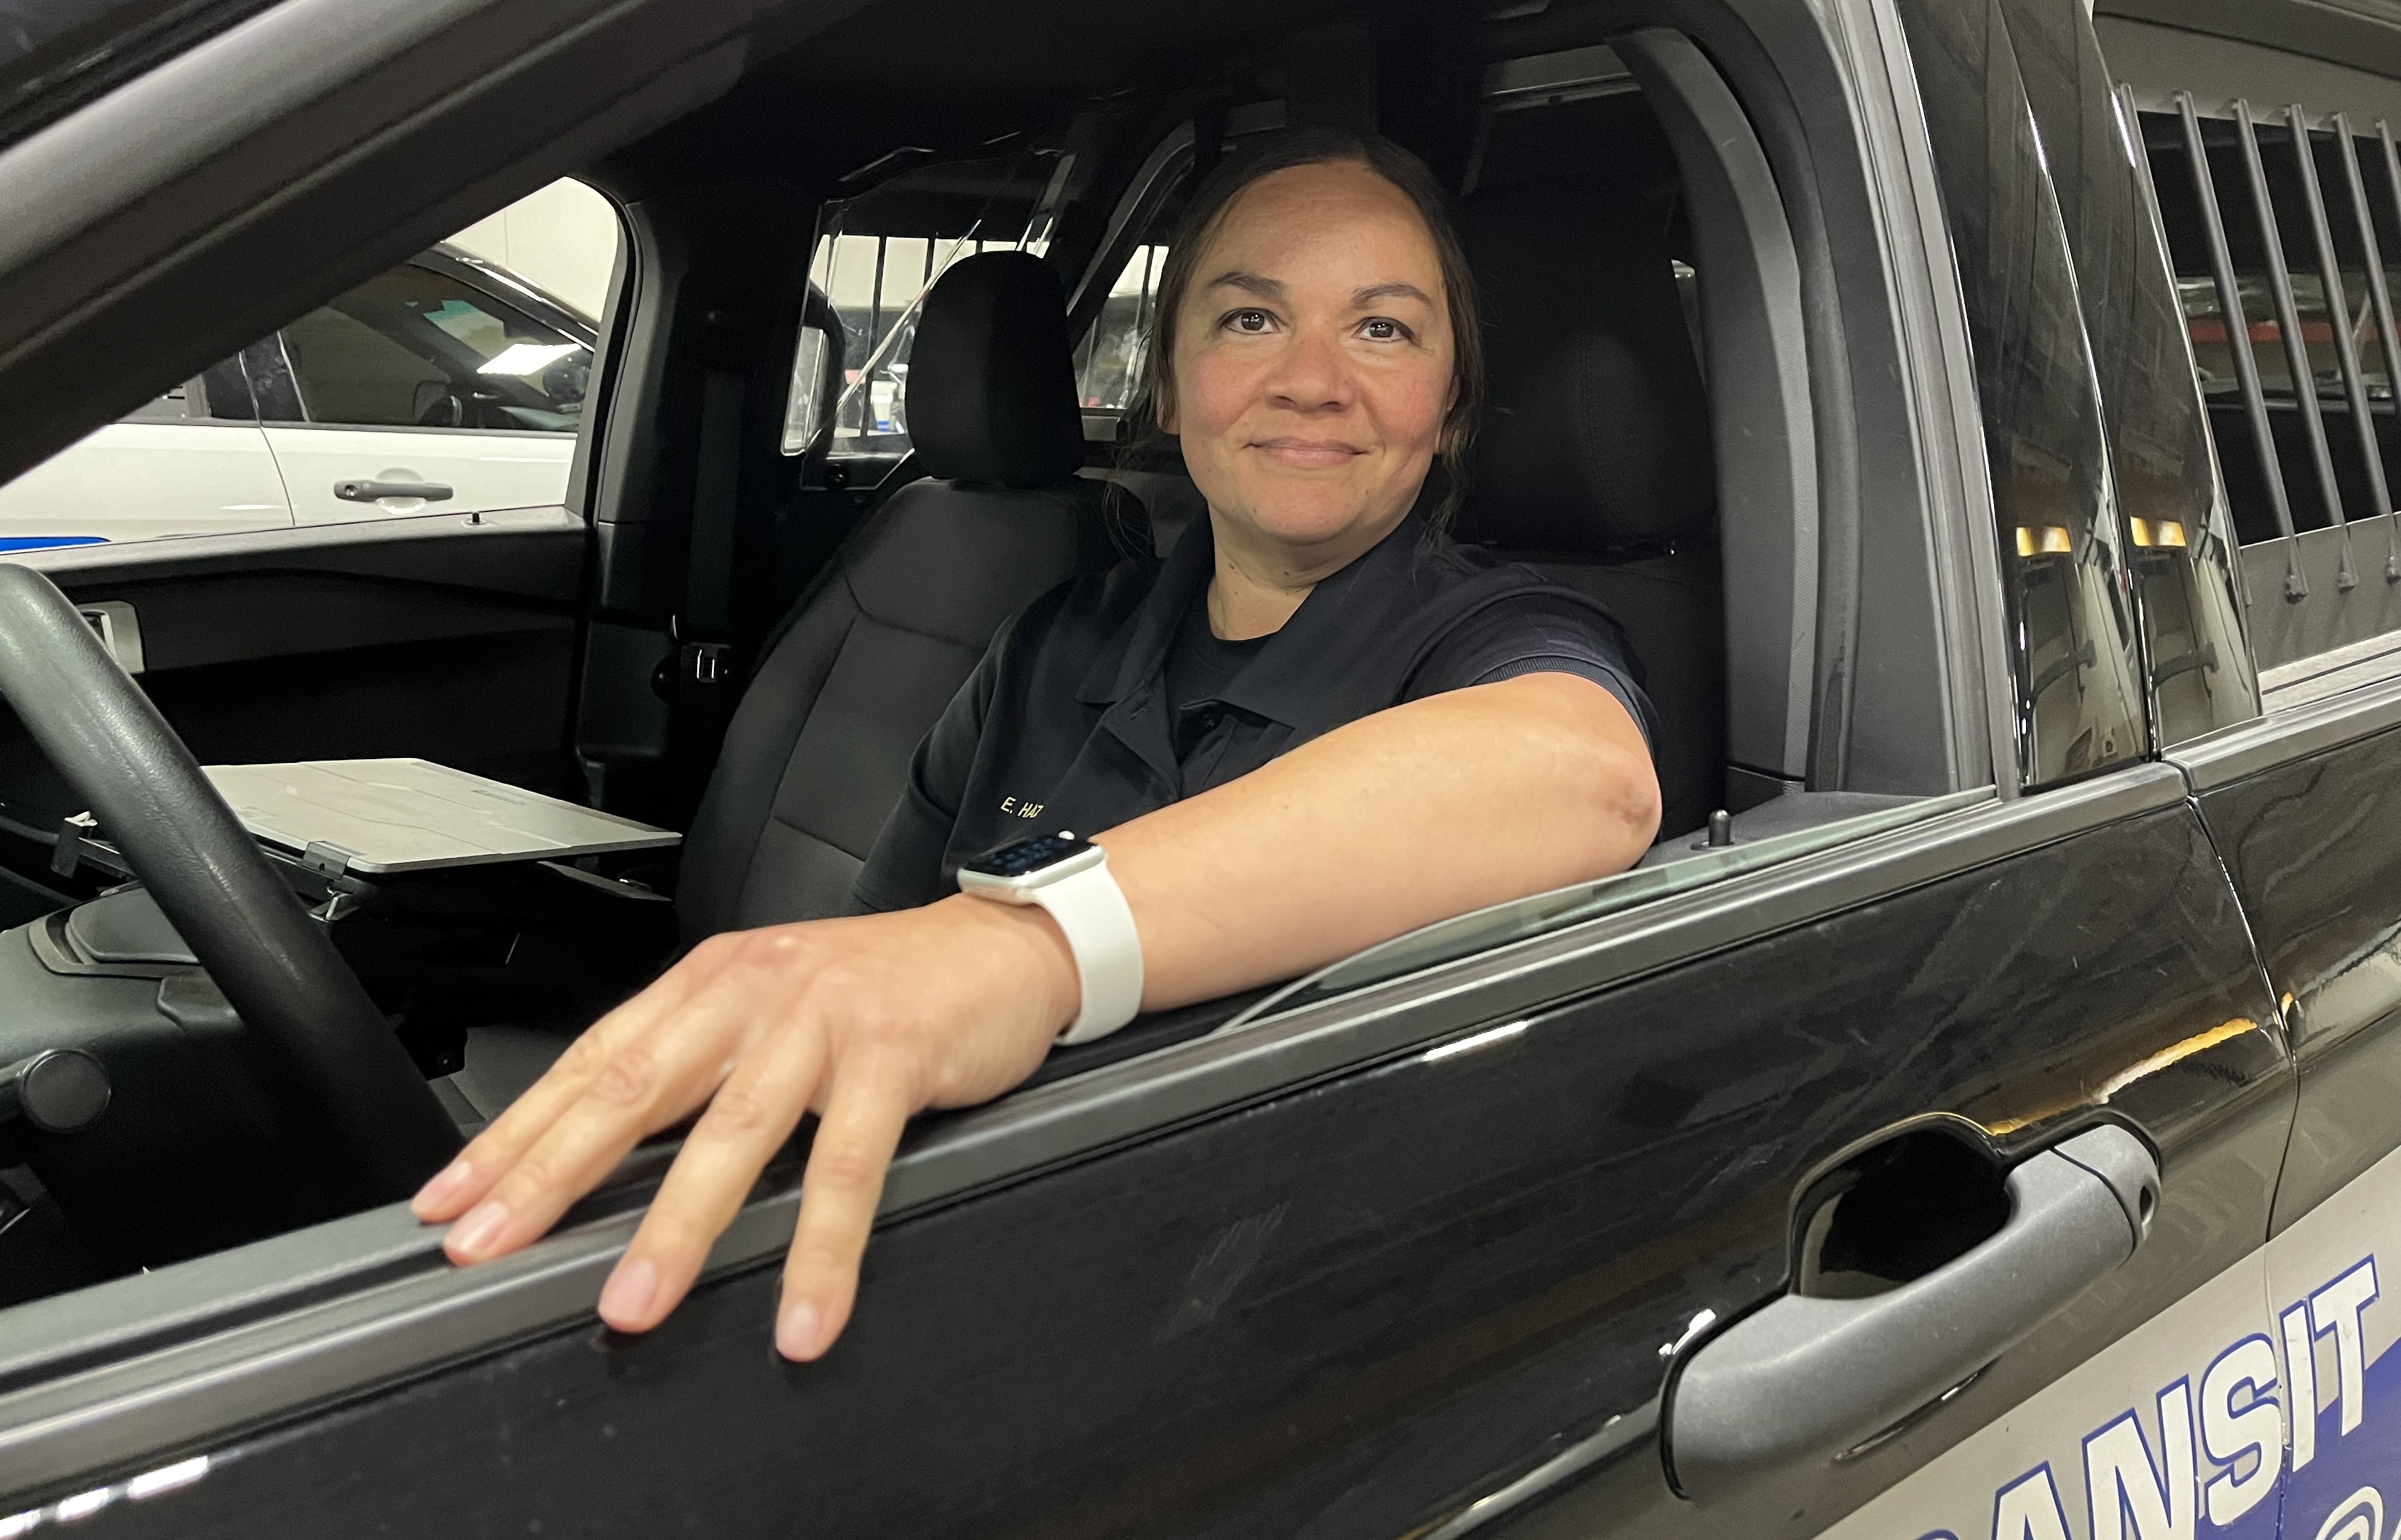 Police Officer Erika Hatle in a squad car.